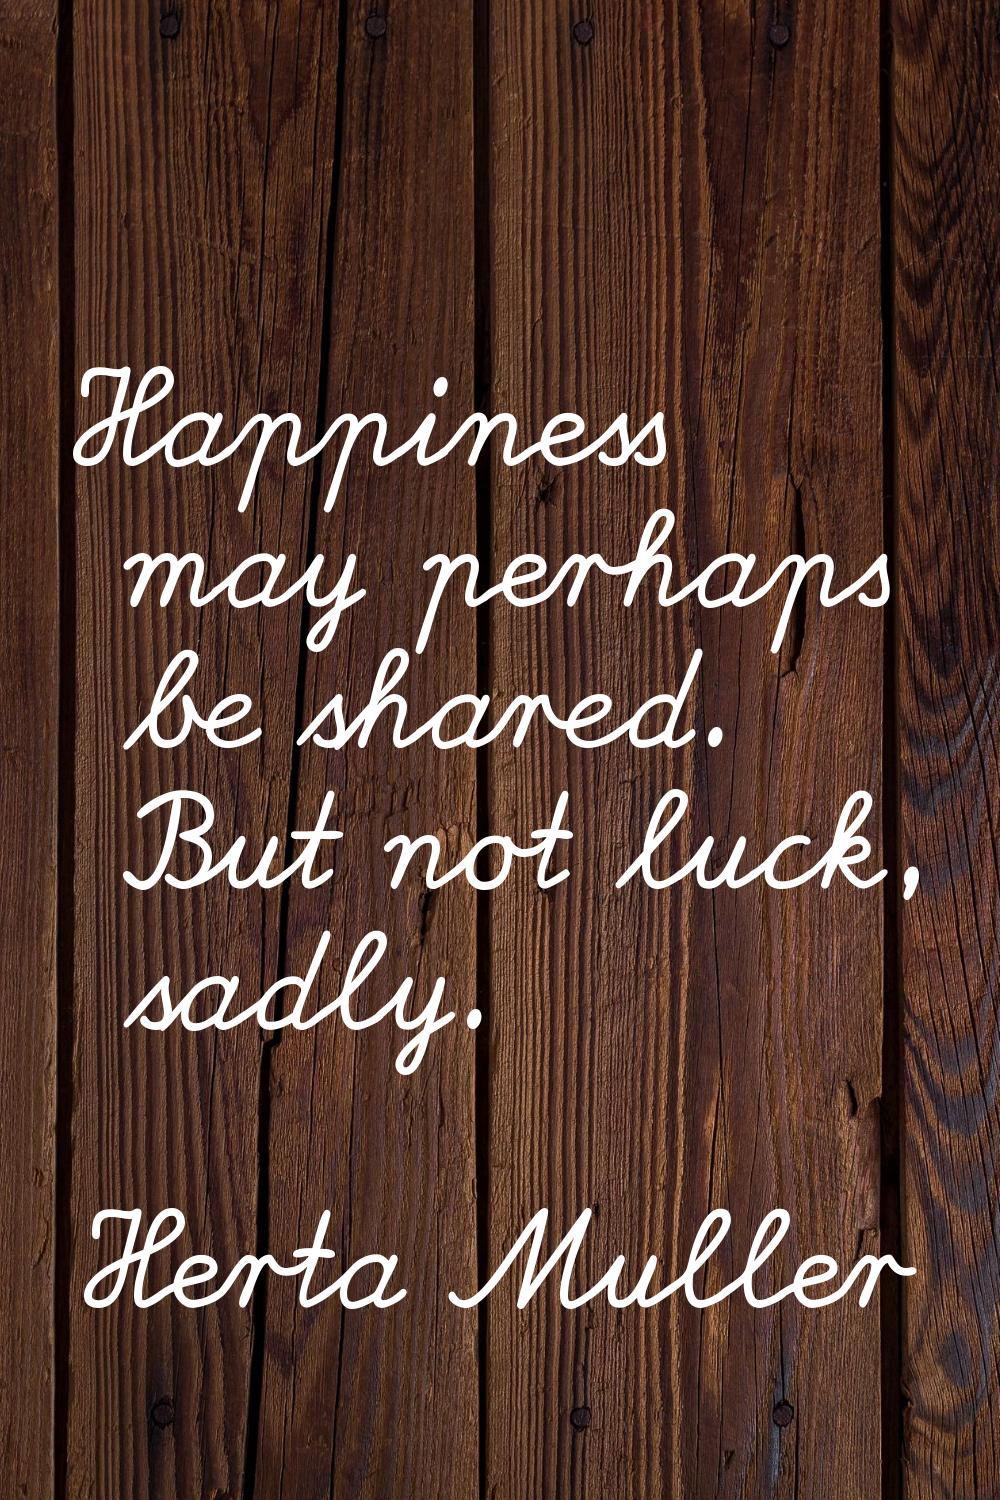 Happiness may perhaps be shared. But not luck, sadly.